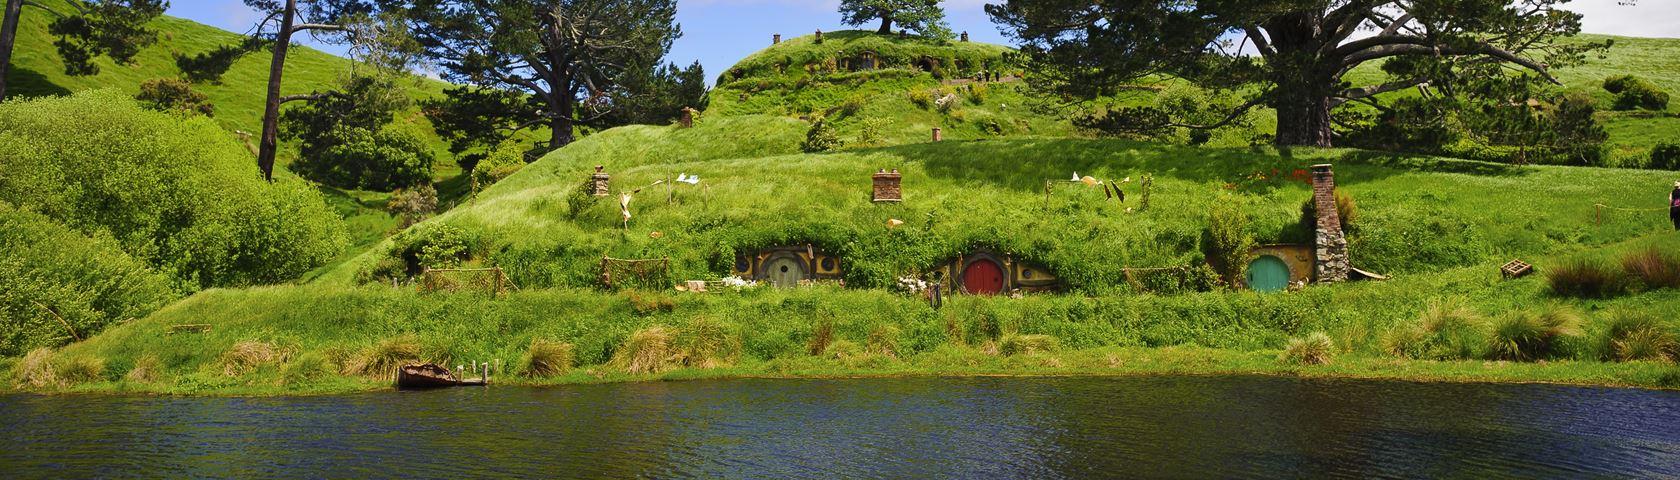 1680x480 The Shire, Middle Earth • Hình ảnh • WallpaperFusion